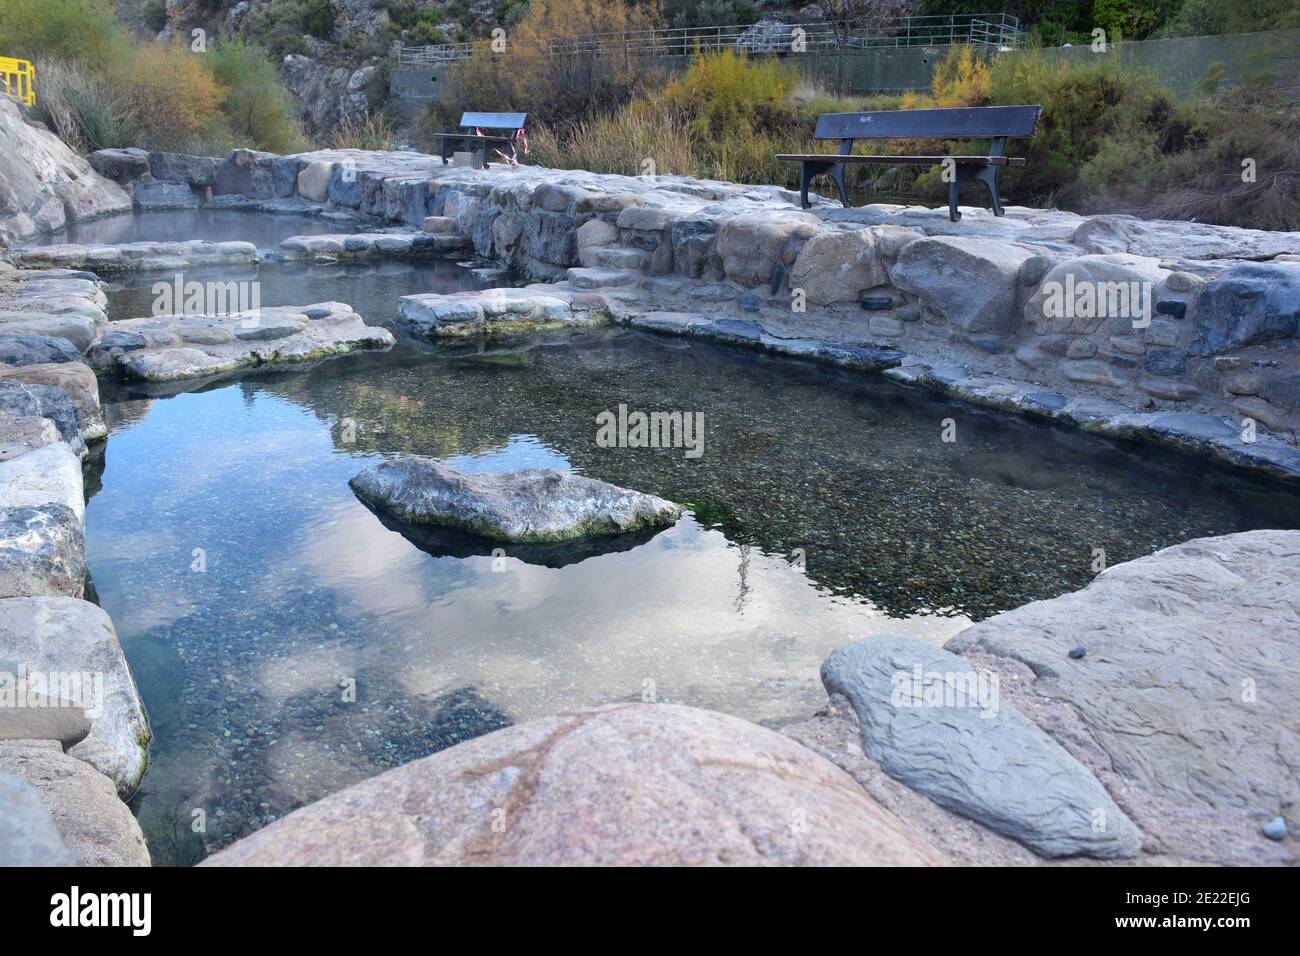 Thermal water pools in the village of Arnedillo. Thermal water pools conditioned in stone. Stock Photo